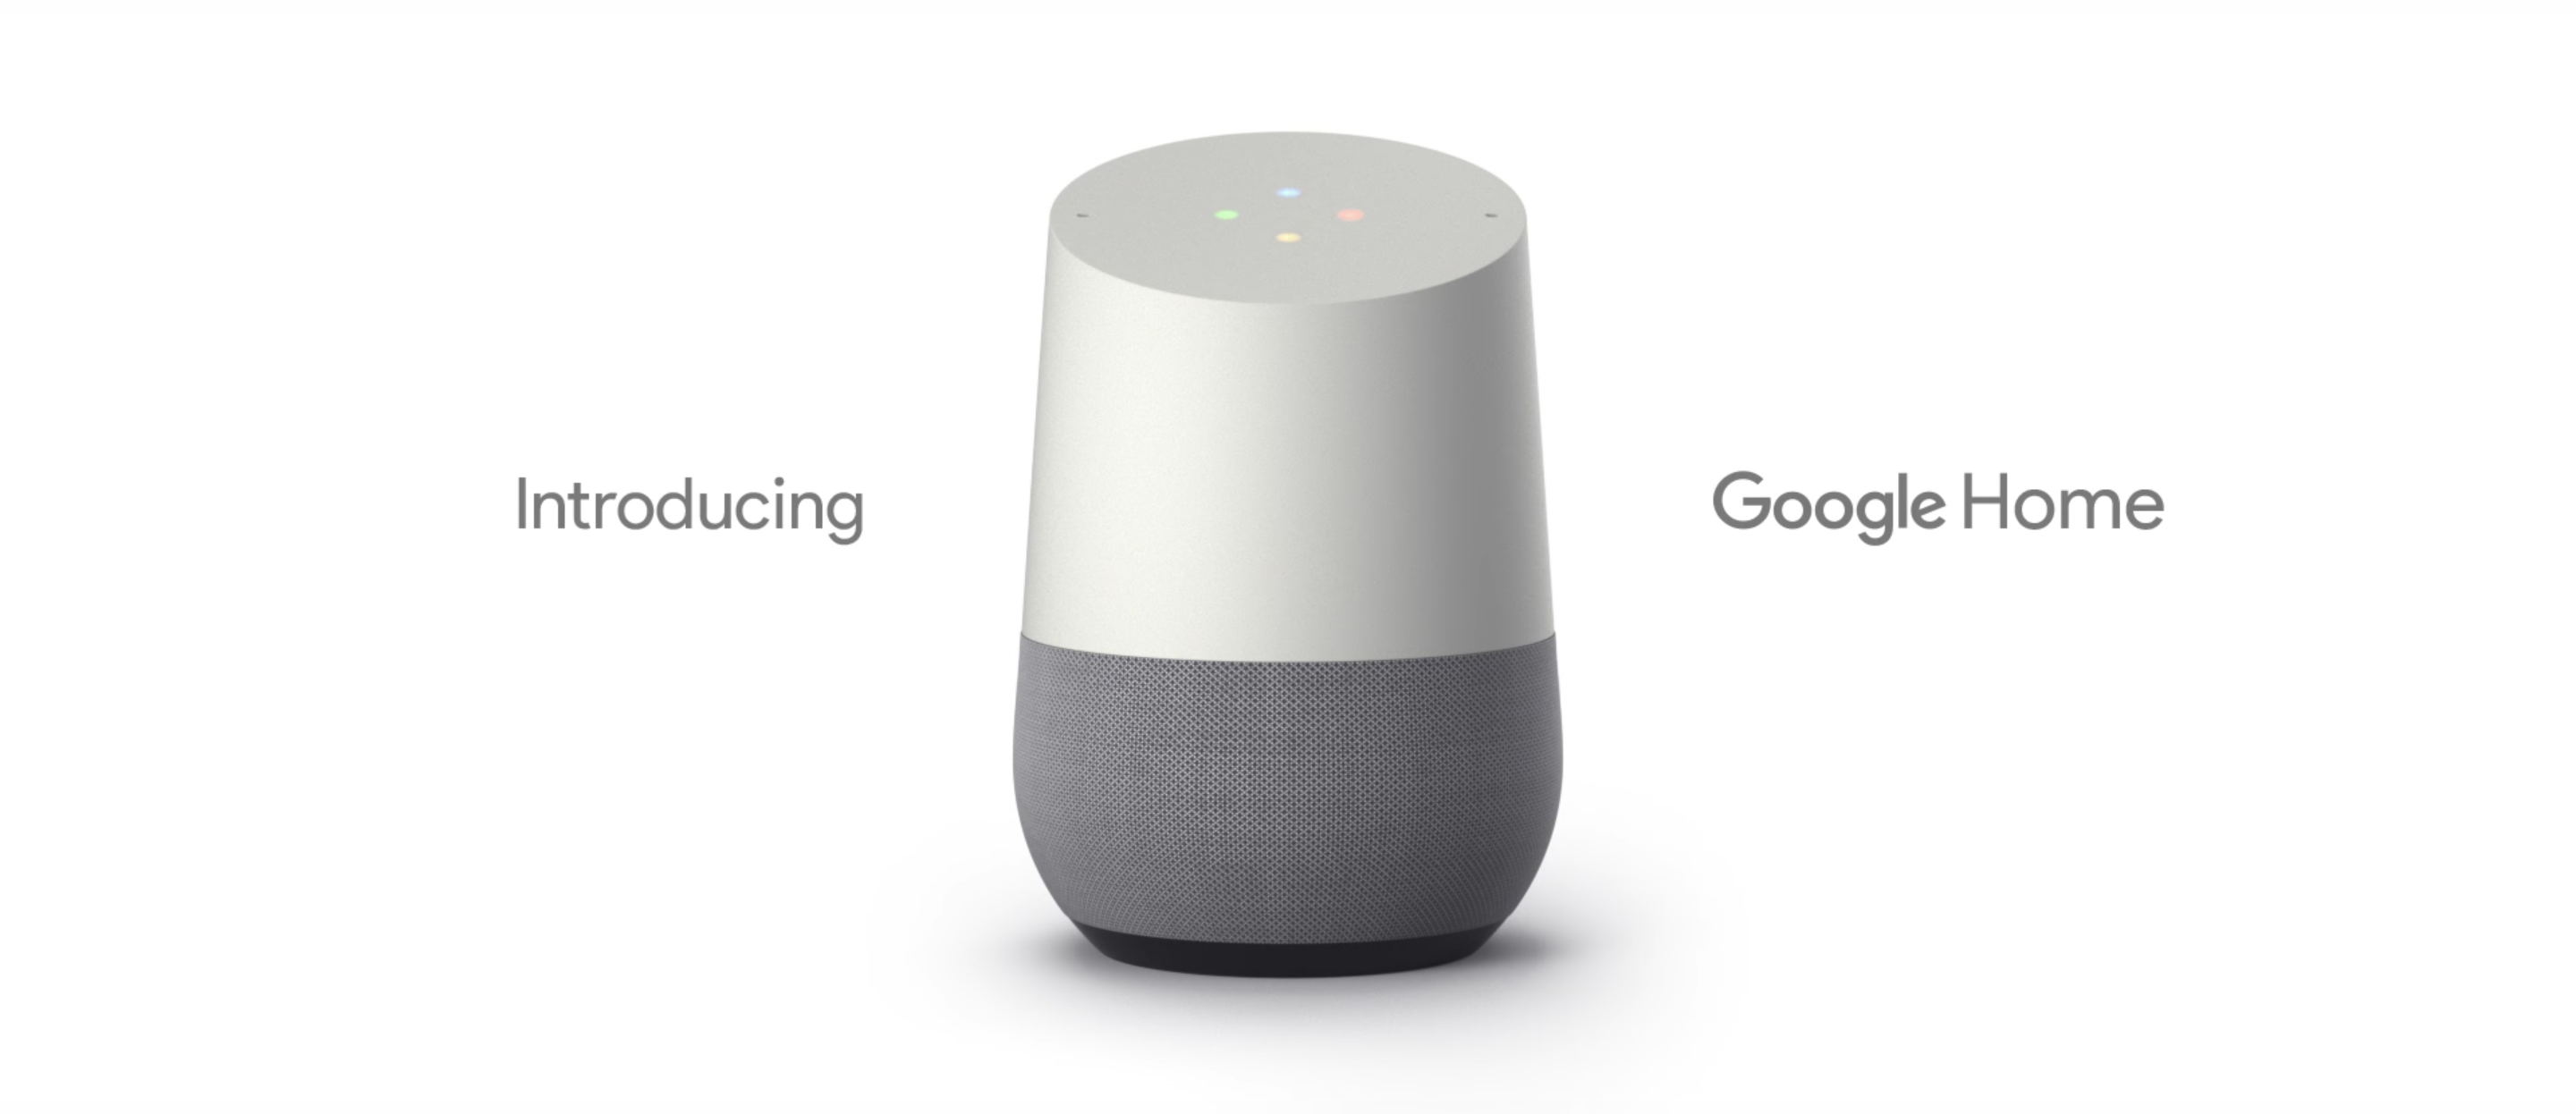 google-home-2017-super-bowl-commercial-youtube-2017-02-03-15-35-30